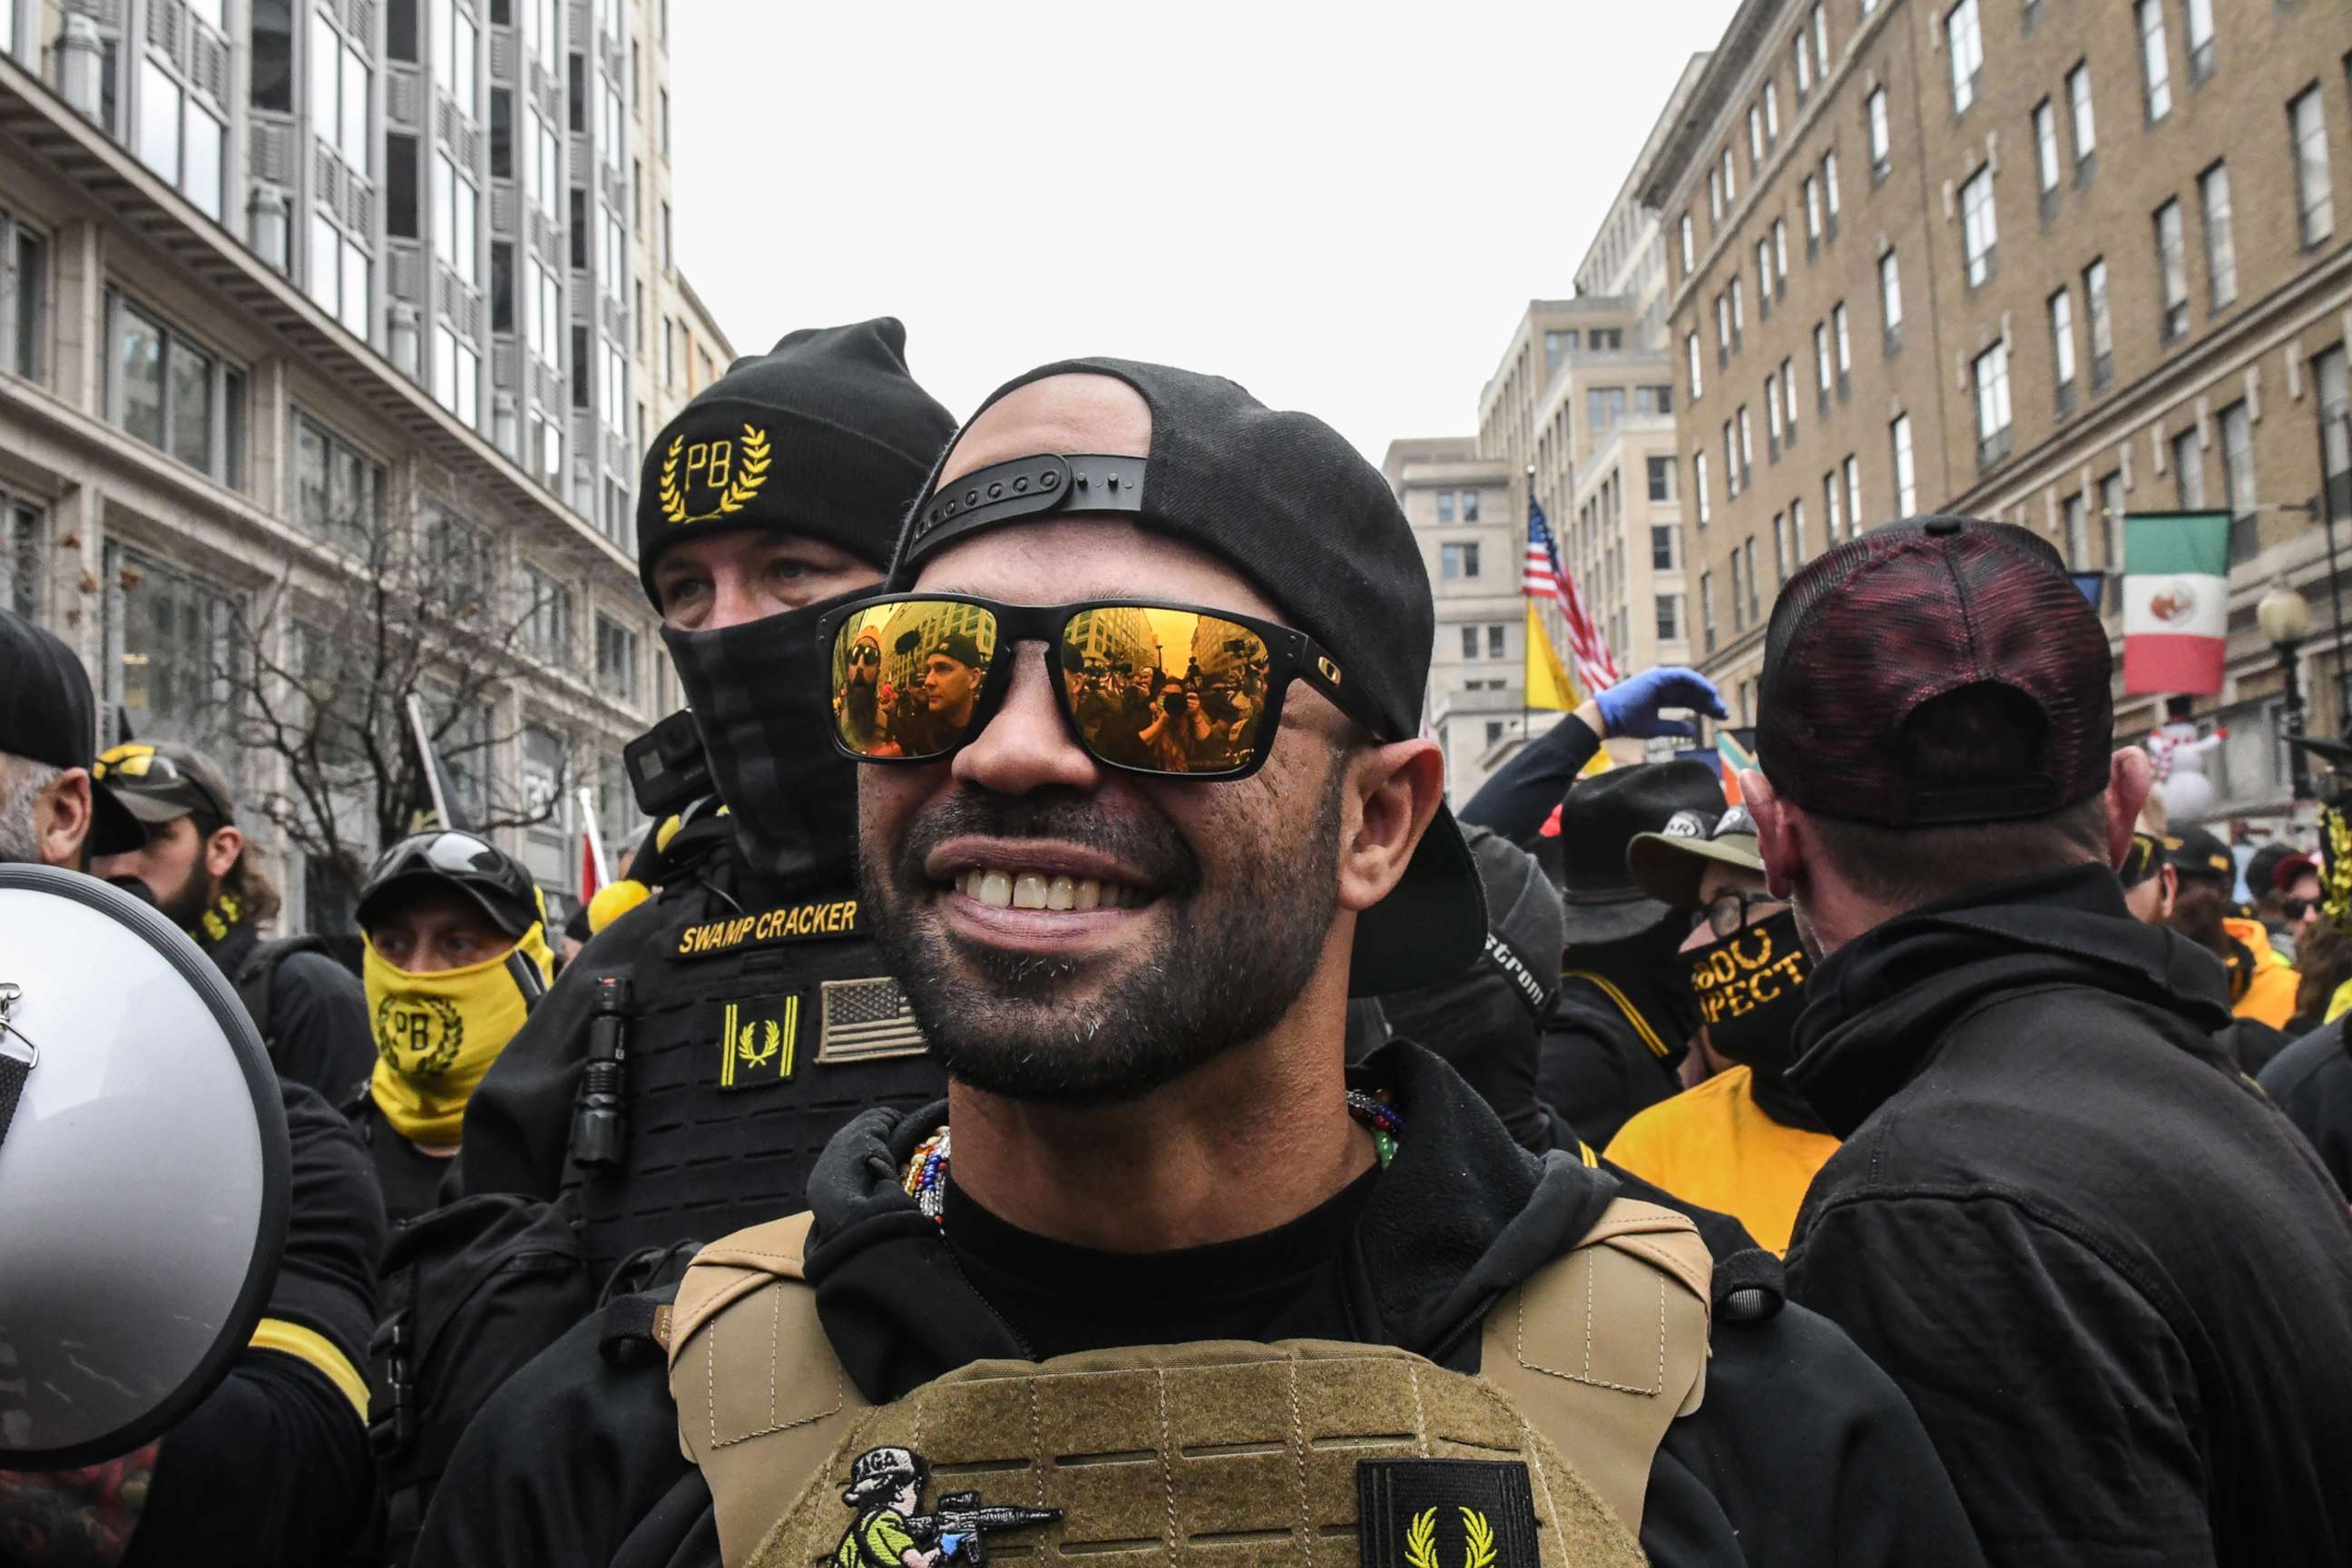 PHOTO: Enrique Tarrio, leader of the Proud Boys, stands outside Harry's bar during a protest, Dec. 12, 2020, in Washington, D.C.